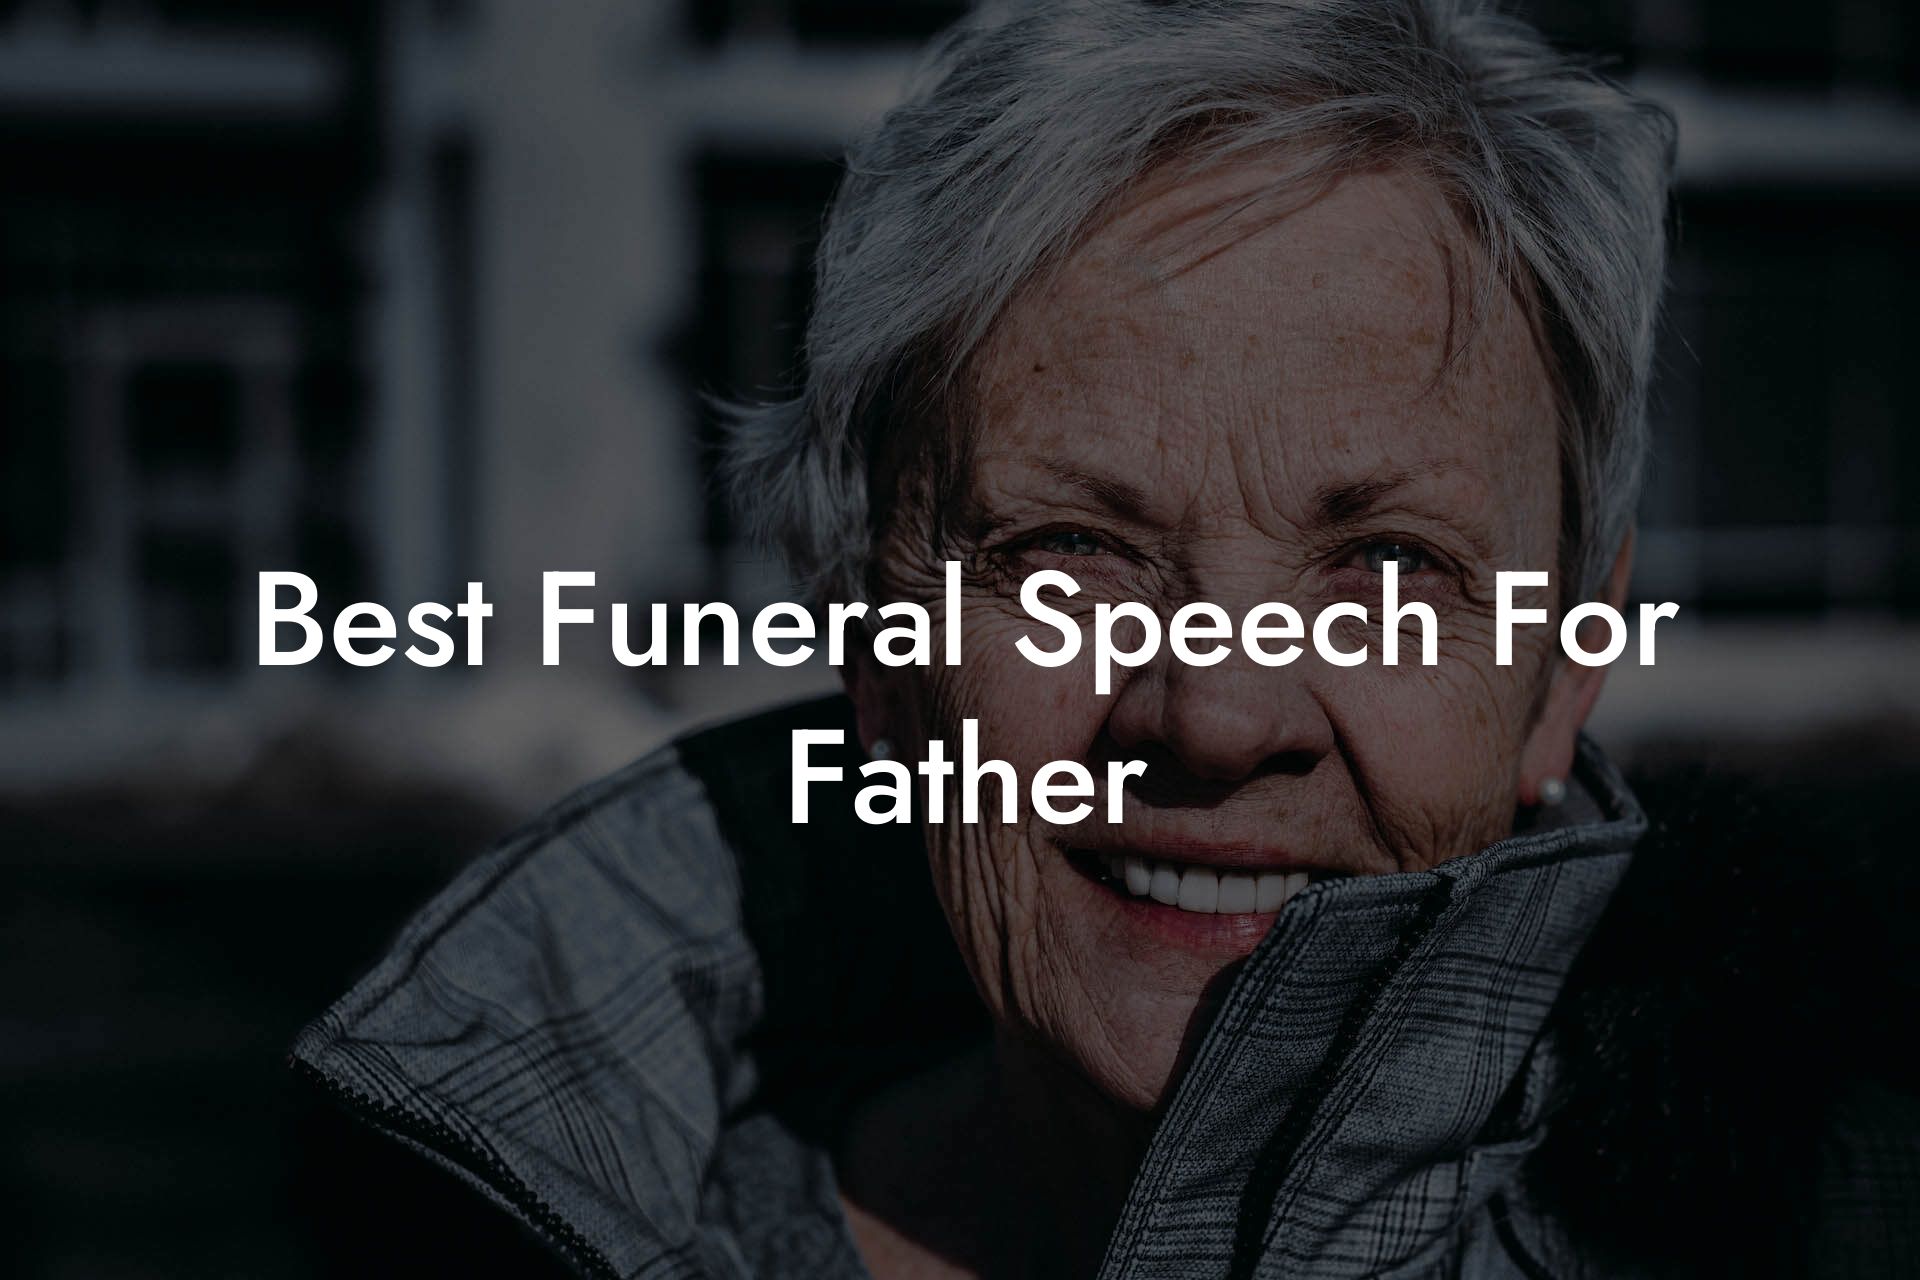 Best Funeral Speech For Father